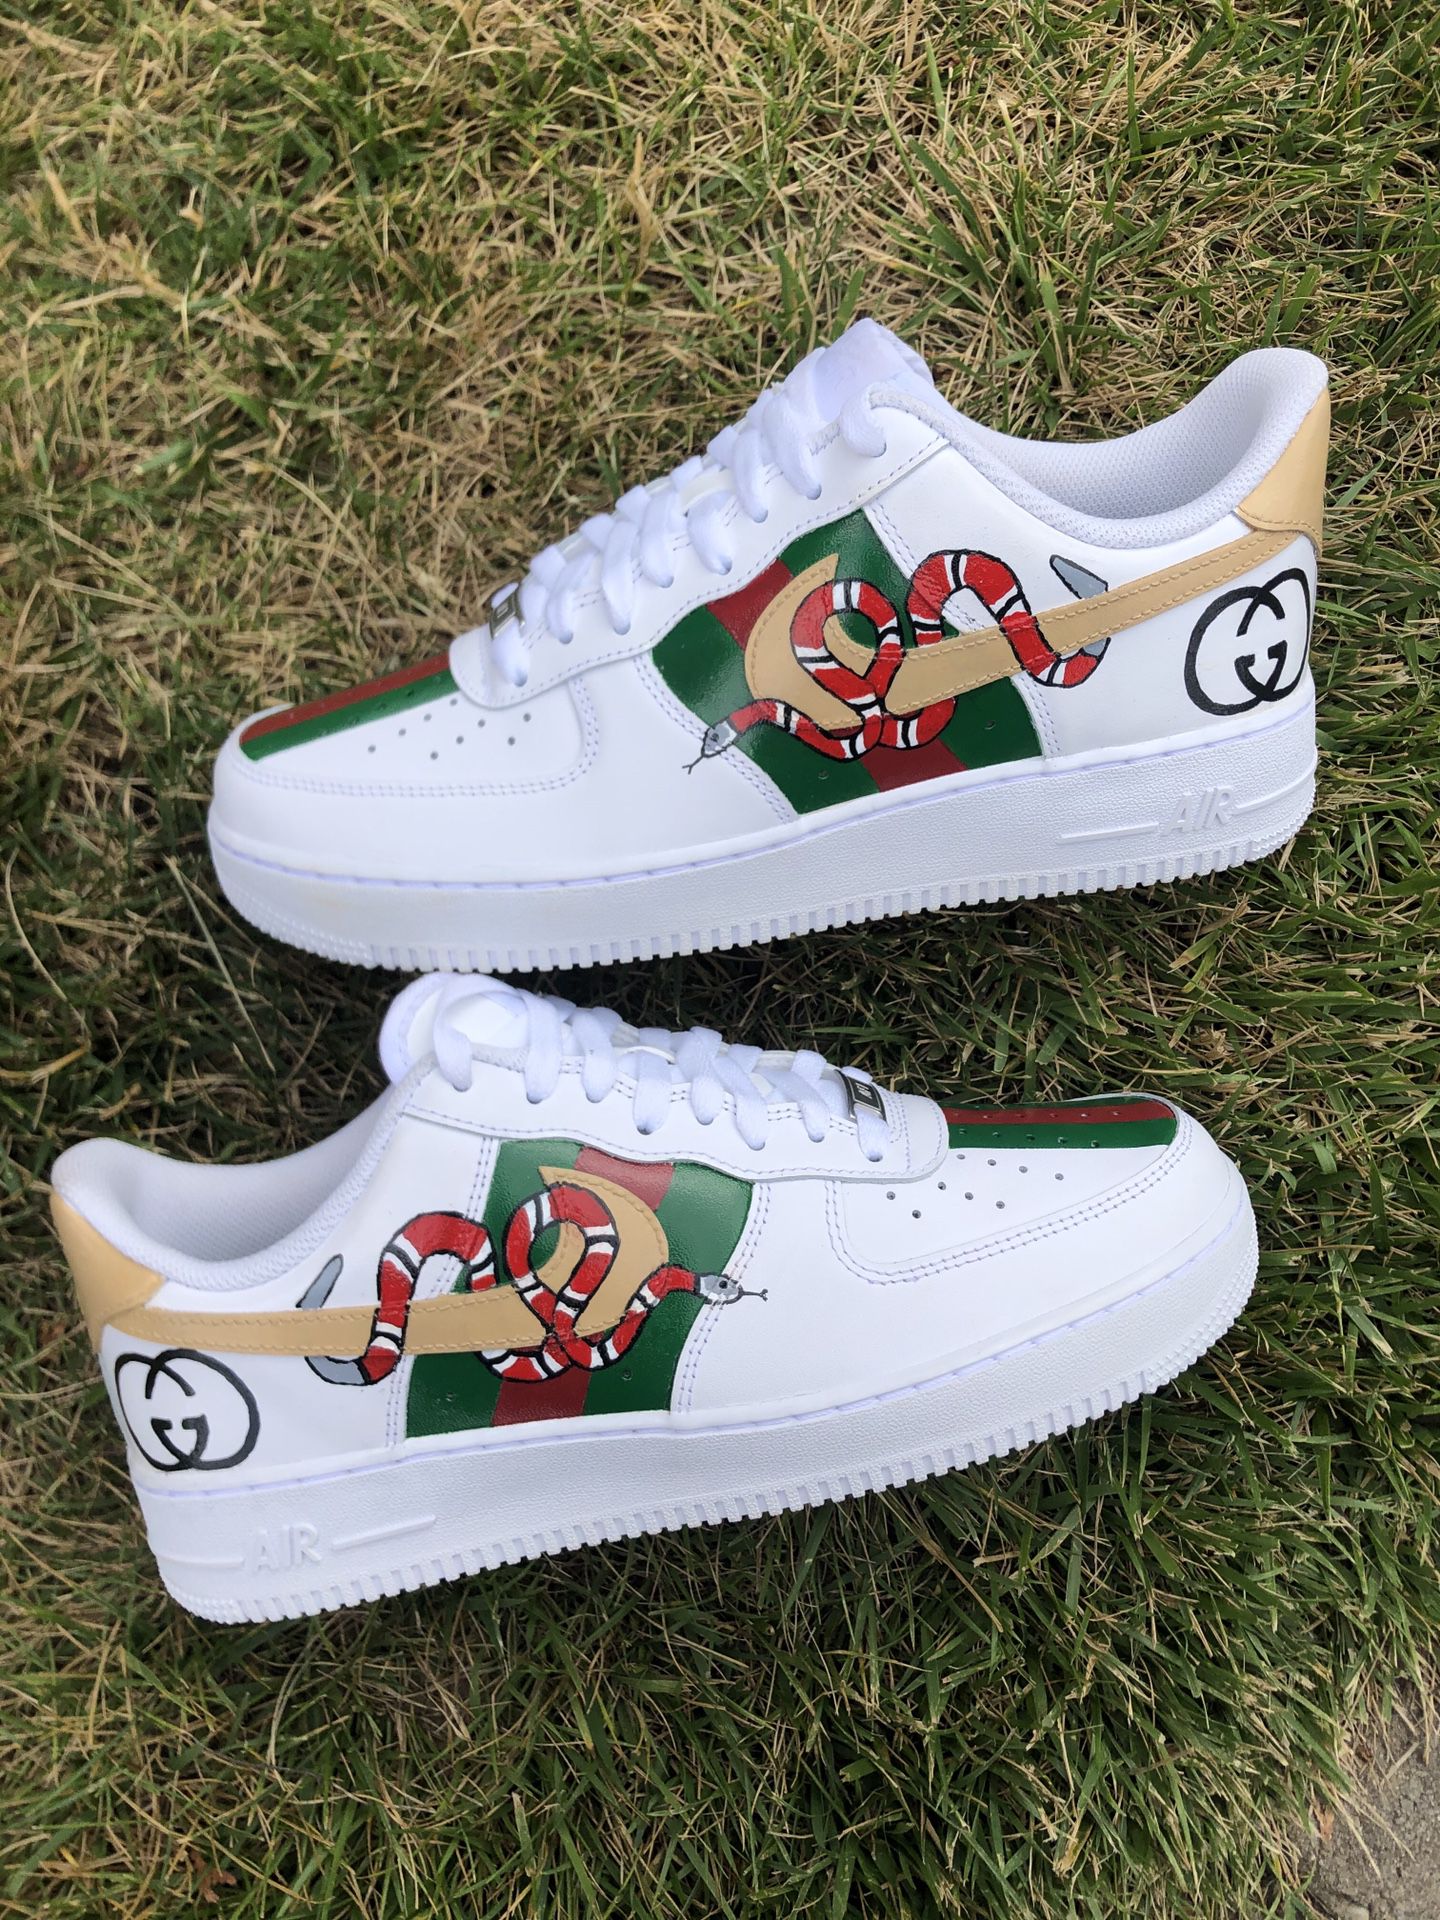 Gucci af1 customs (yes i do other customs)